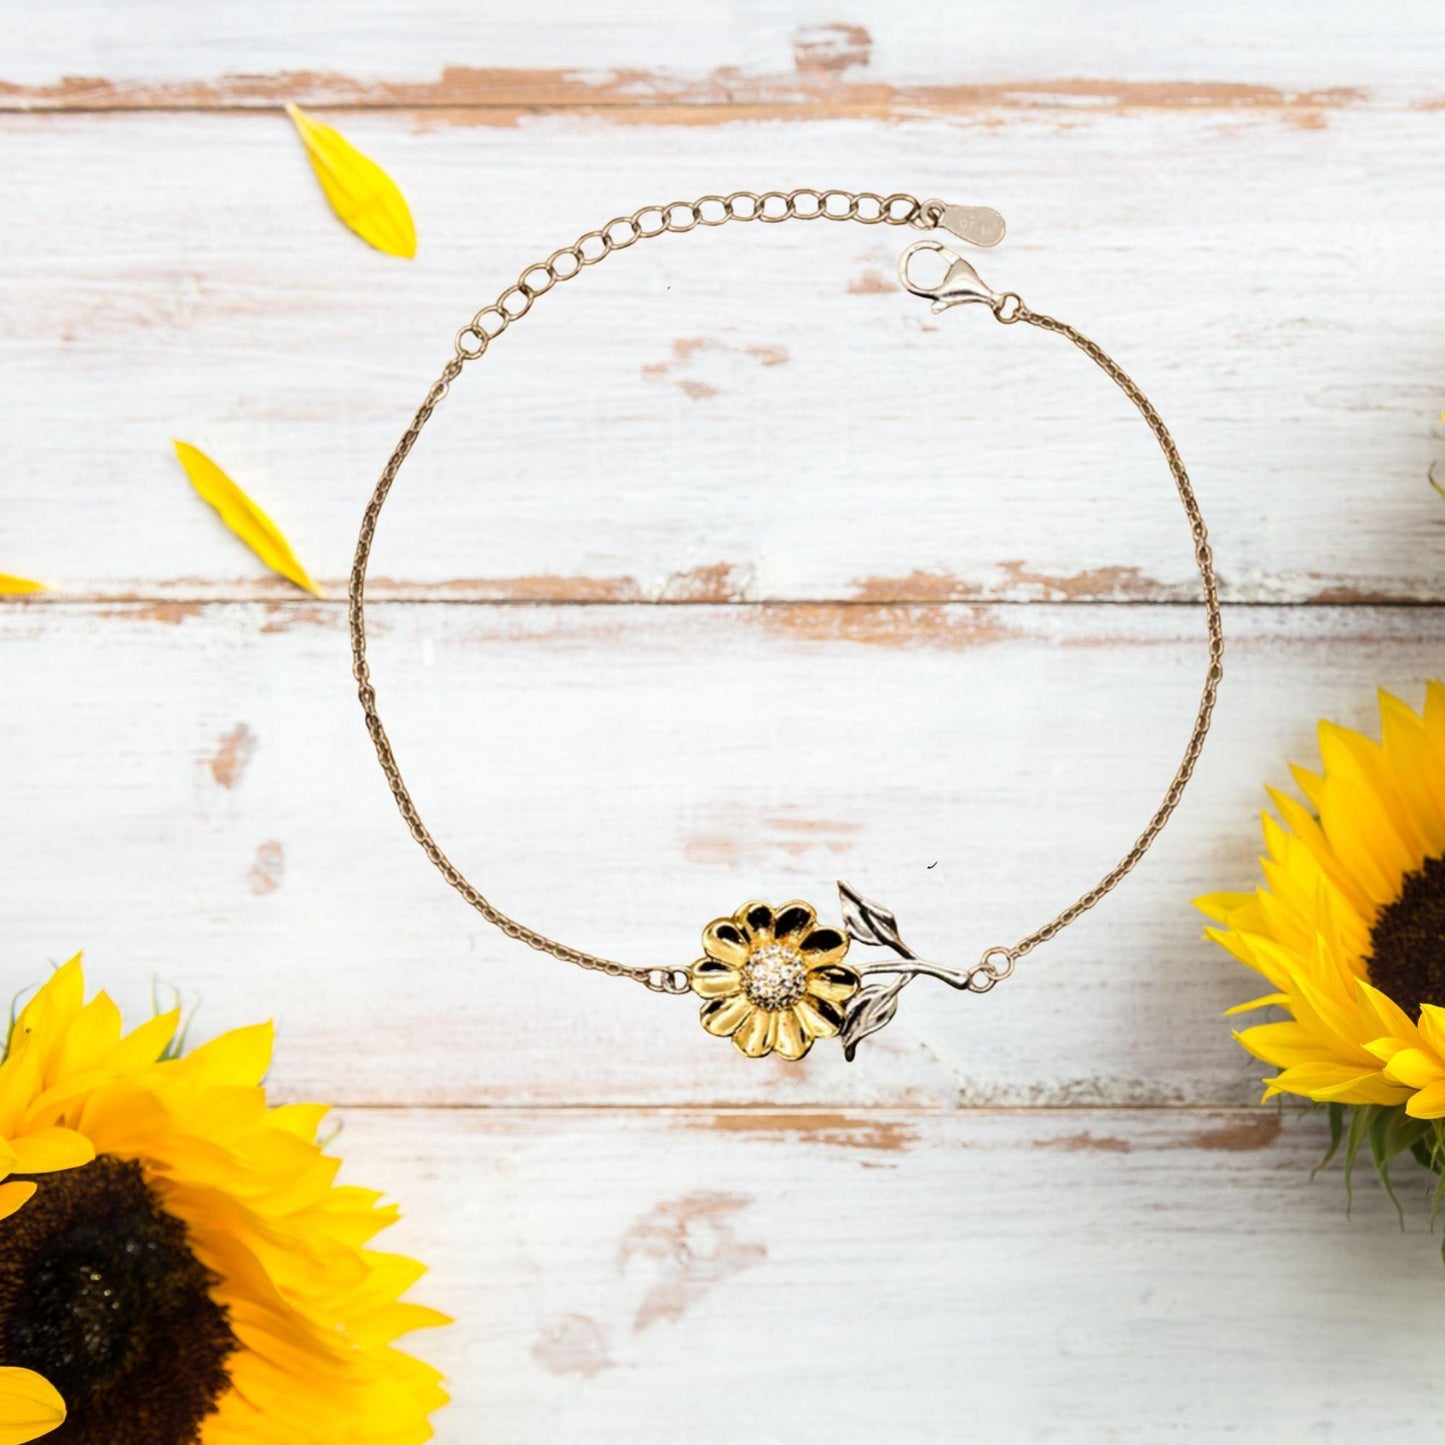 Remarkable Fitness Trainer Gifts, Your dedication and hard work, Inspirational Birthday Christmas Unique Sunflower Bracelet For Fitness Trainer, Coworkers, Men, Women, Friends - Mallard Moon Gift Shop